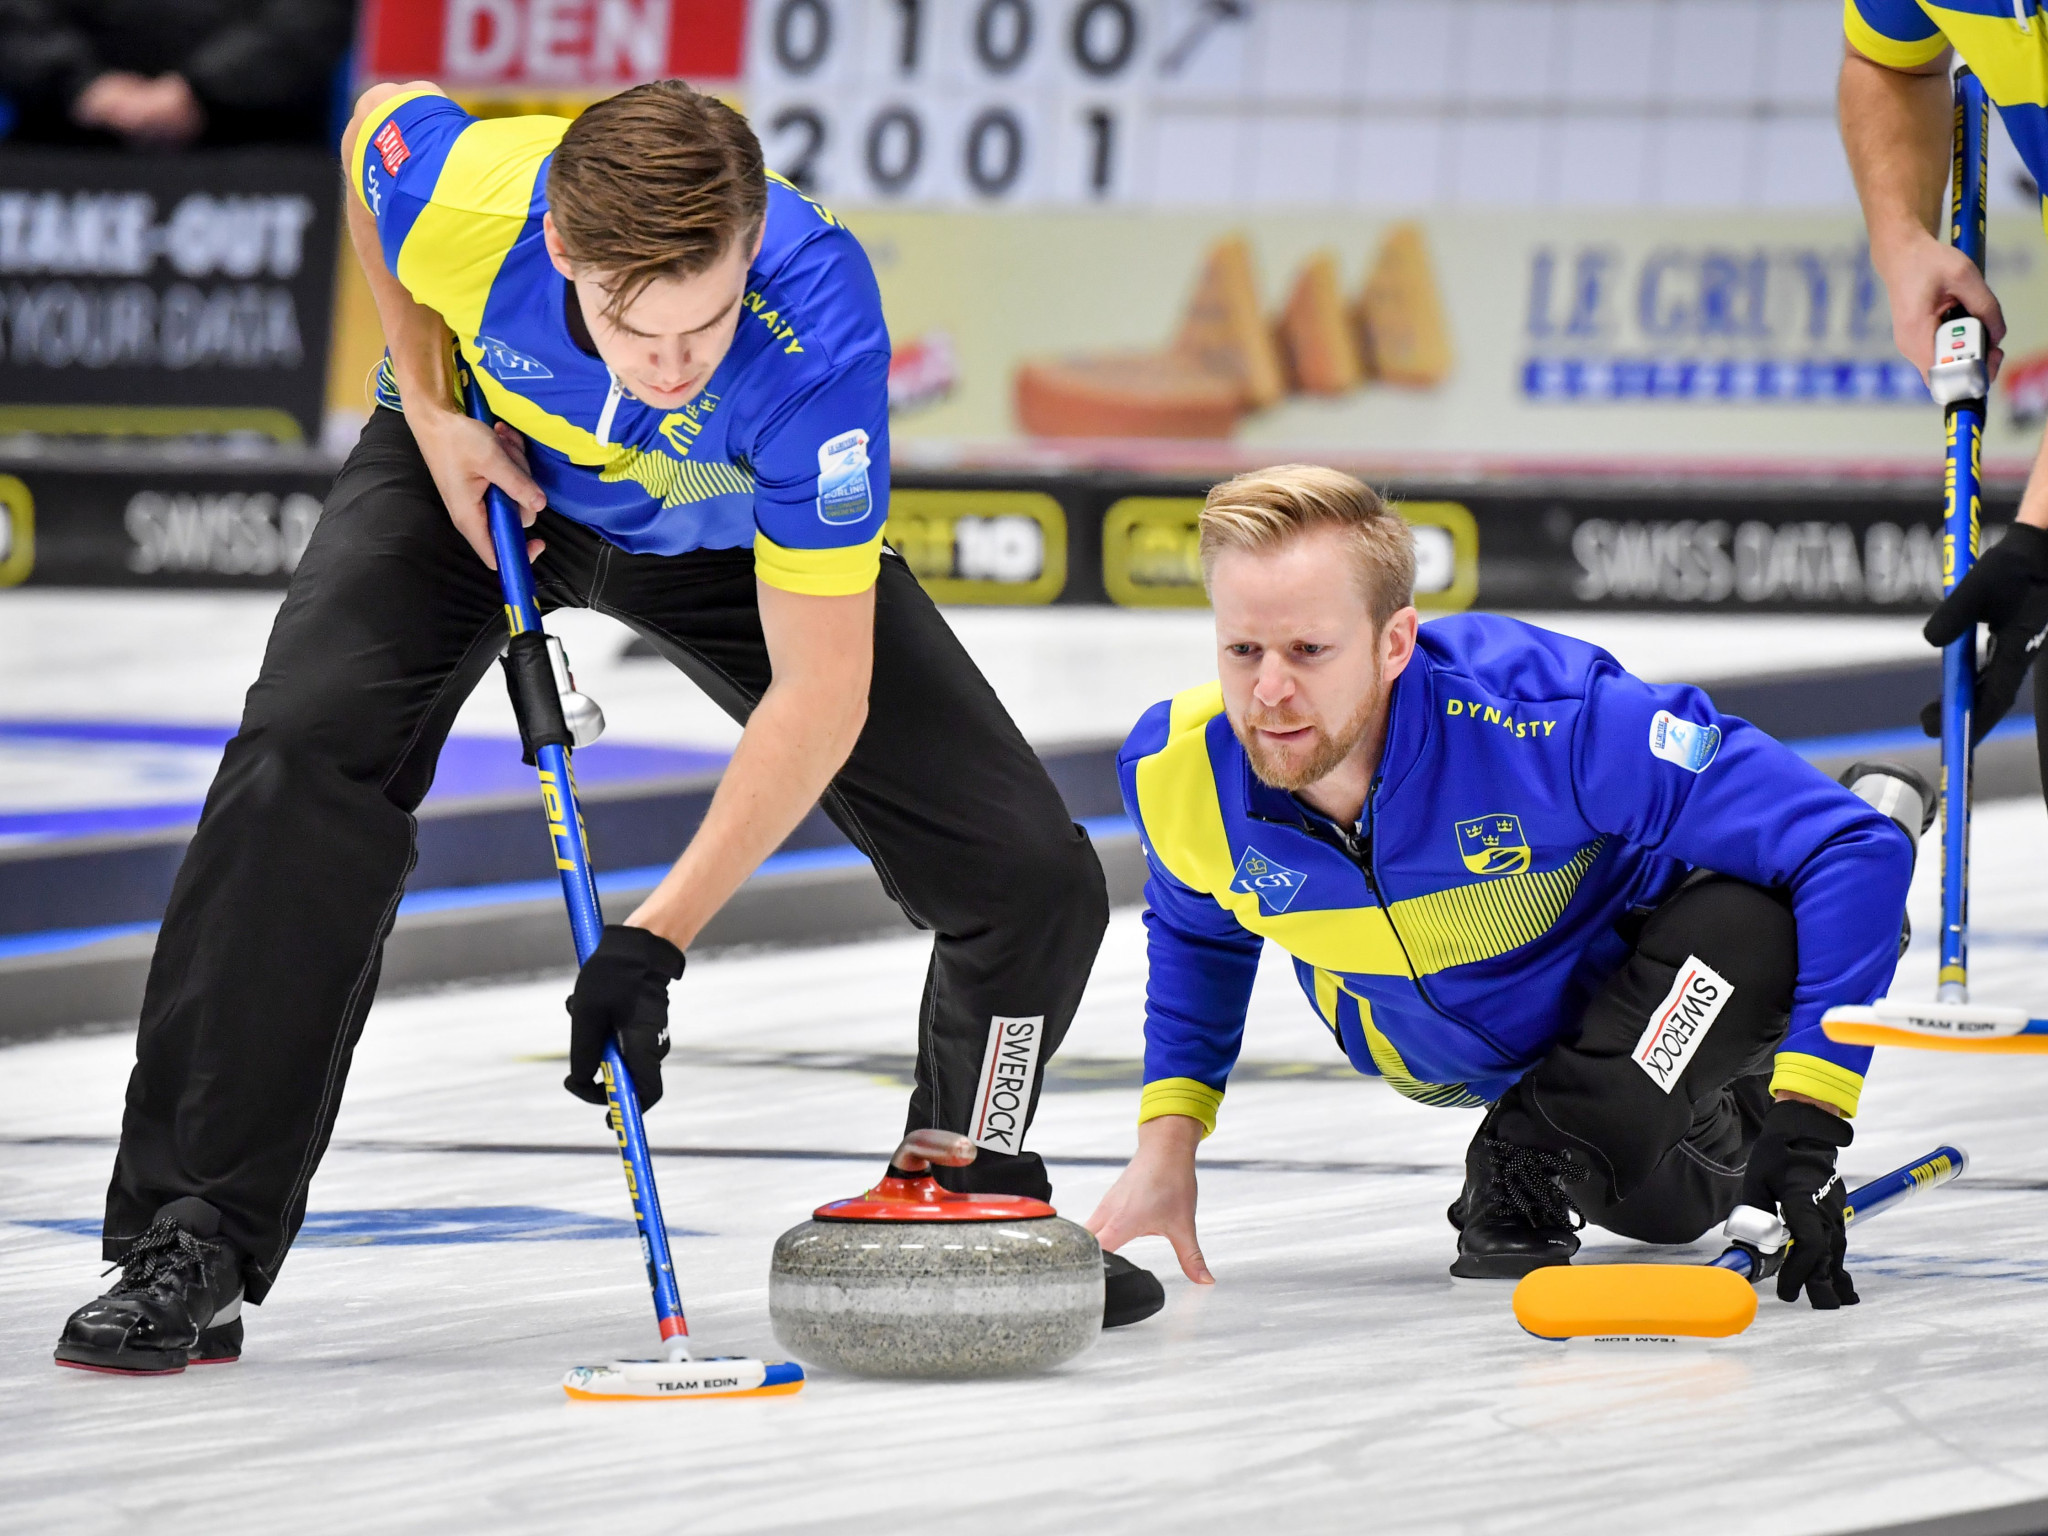 Edin eyes third title in a row at Men's World Curling Championship in Calgary